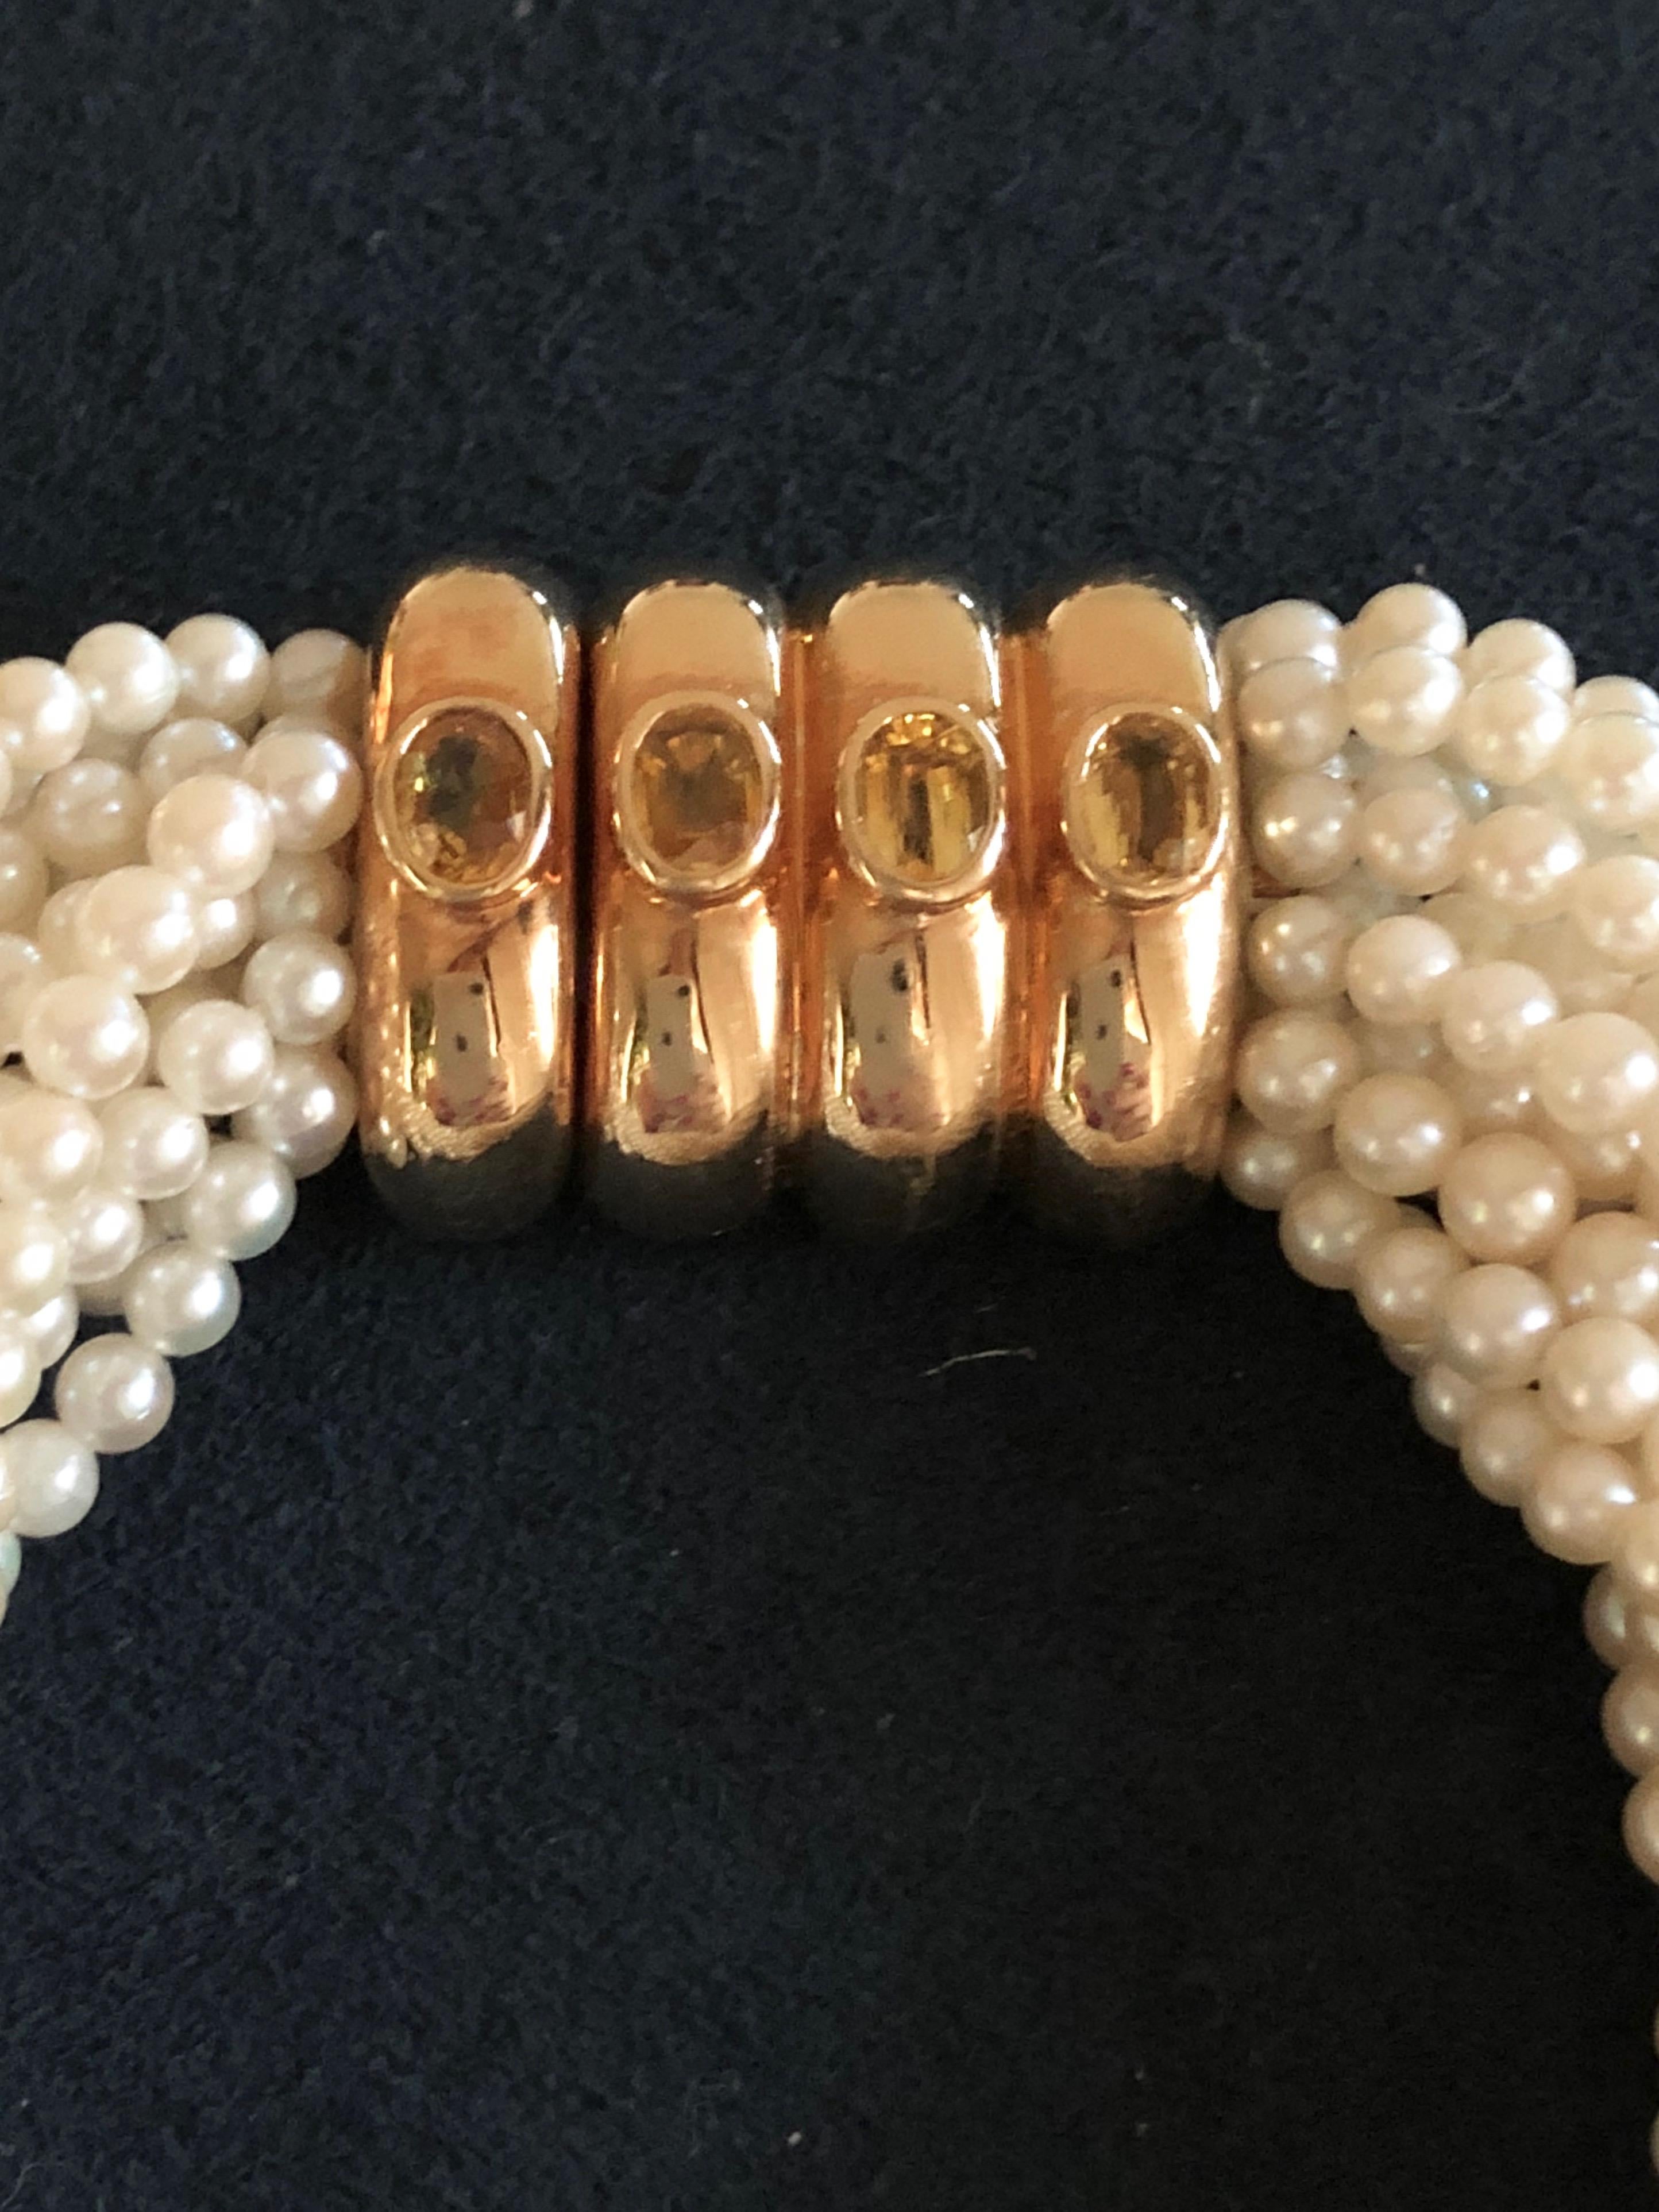 Elegant and sophisticated torsade bracelet made of 14 strands of Akoya pearls. 
Features a 18K gold 4-bands clasp with Poiray maker's mark. 
Lenght: 21.5 cm
Condition: Very Good
Comes With: Original Poiray pouch 

All items at la Bourse du Luxe are